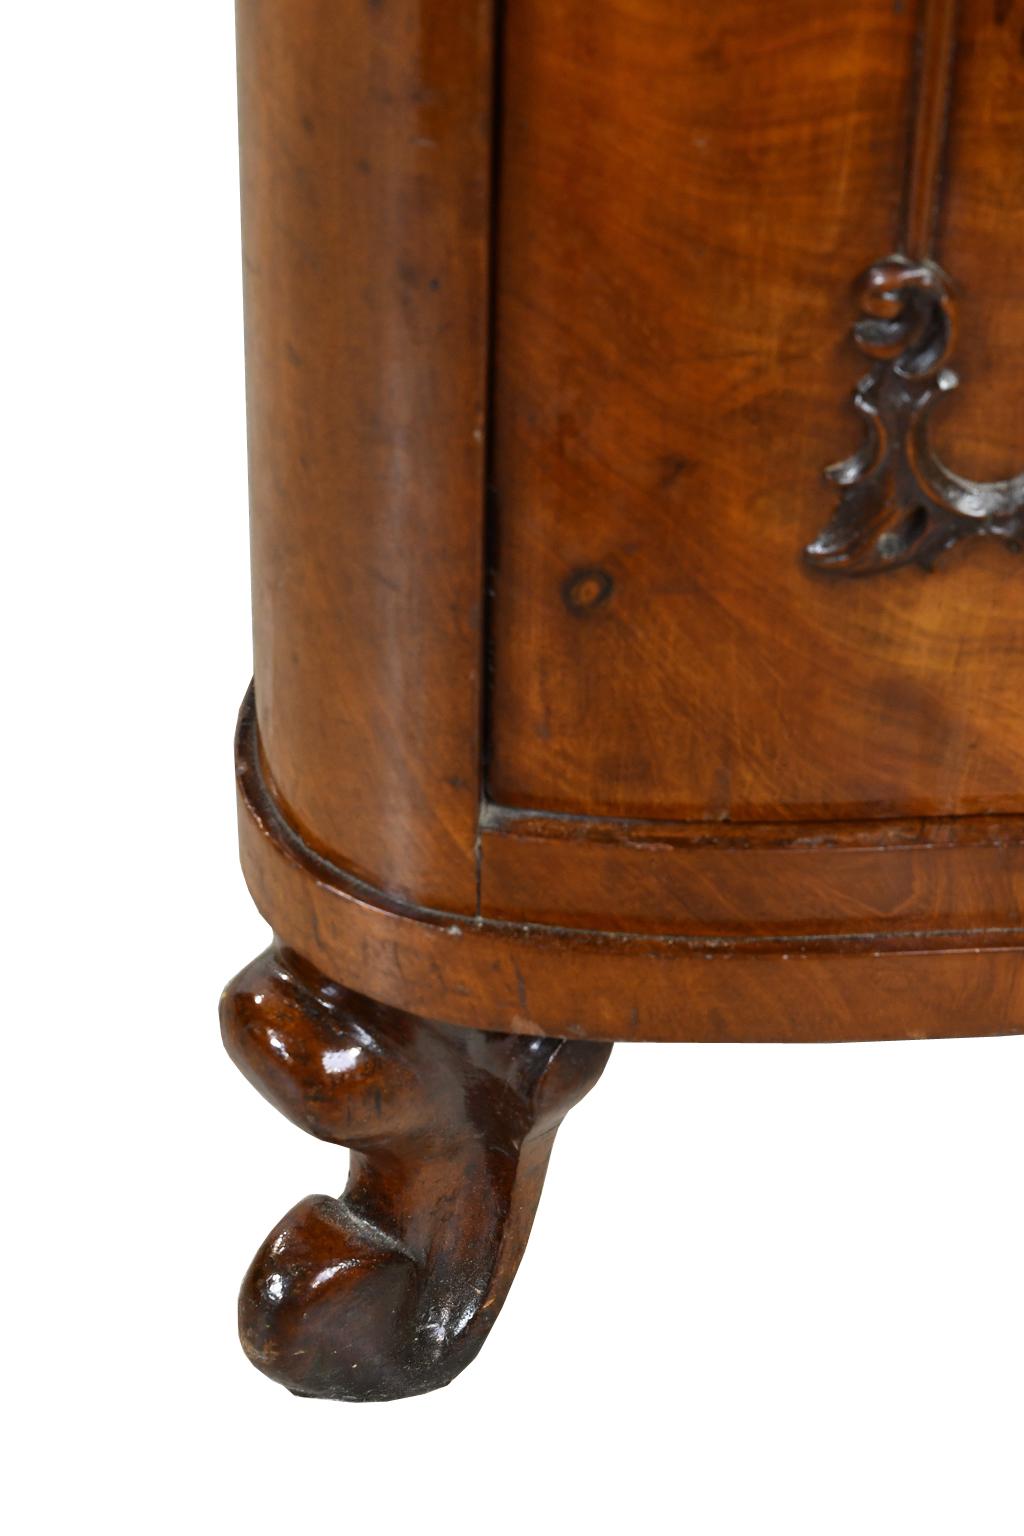 Christian VIII Serpentine-Front Sideboard in West Indies Mahogany, circa 1850 For Sale 11